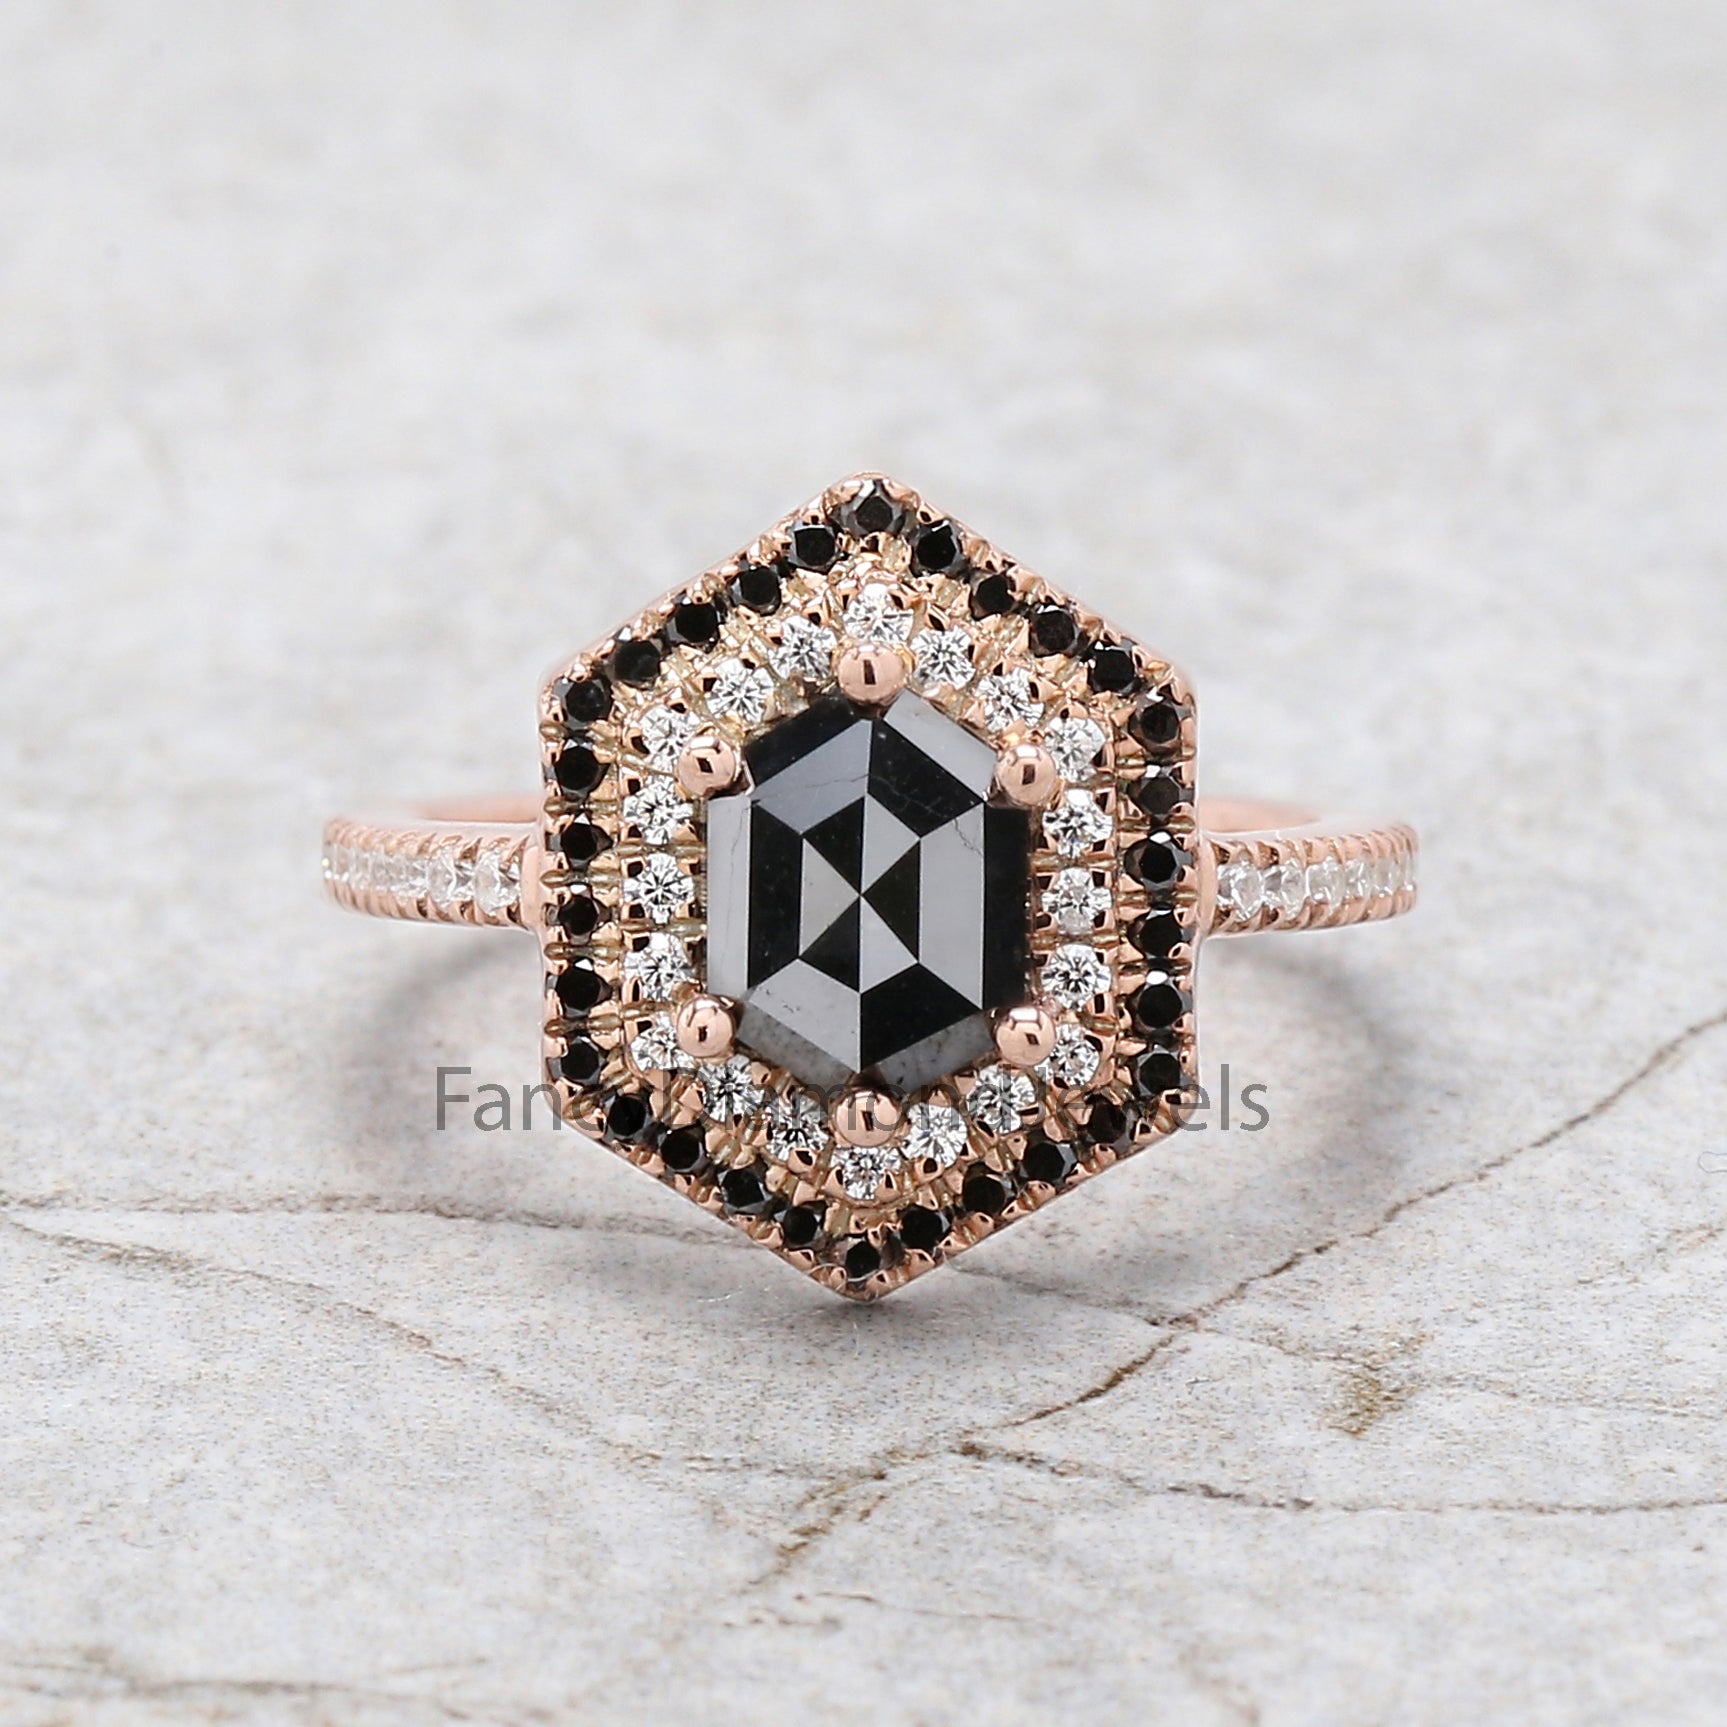 Hexagon Black Color Diamond Ring 1.26 Ct 7.95 MM Hexagon Shape Diamond Ring 14K Solid Rose Gold Silver Engagement Ring Gift For Her QL9083